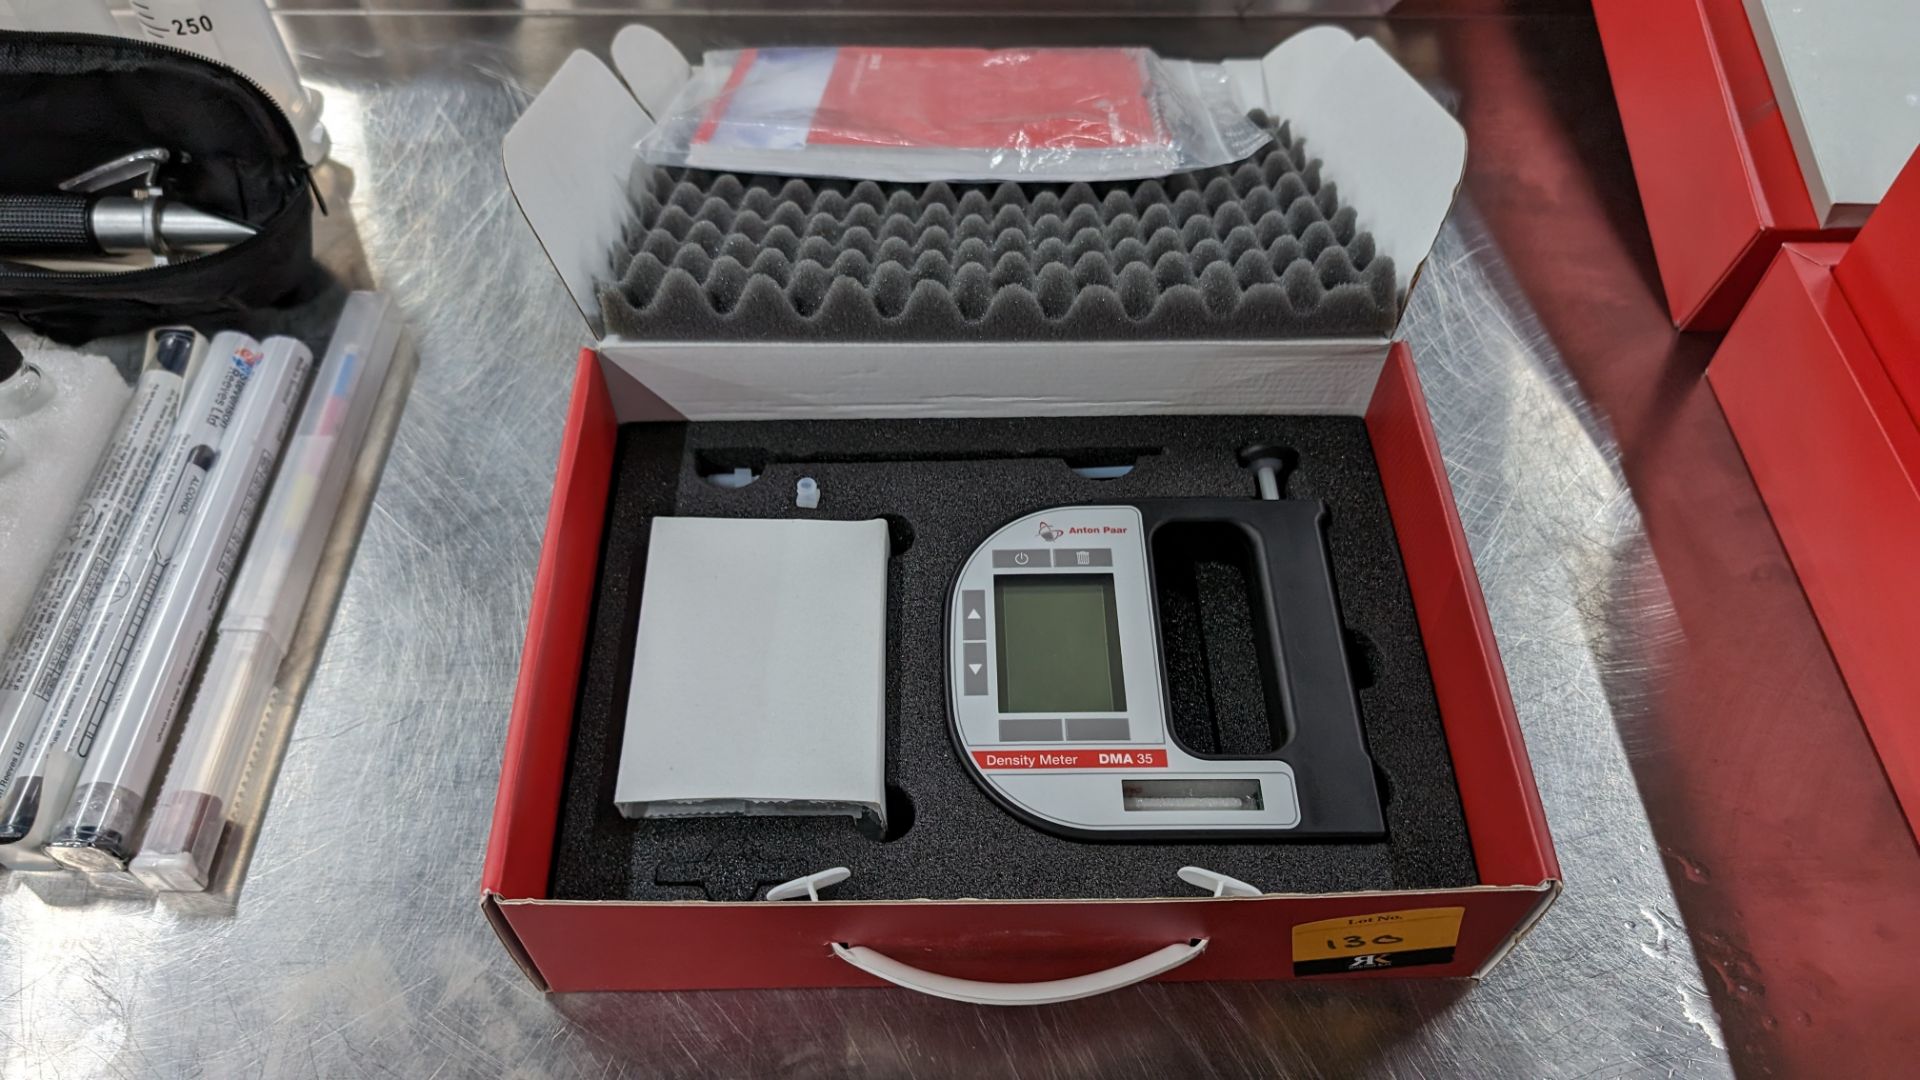 Anton Paar density meter, model DMA 35, including box, consumables and book pack - Image 2 of 8